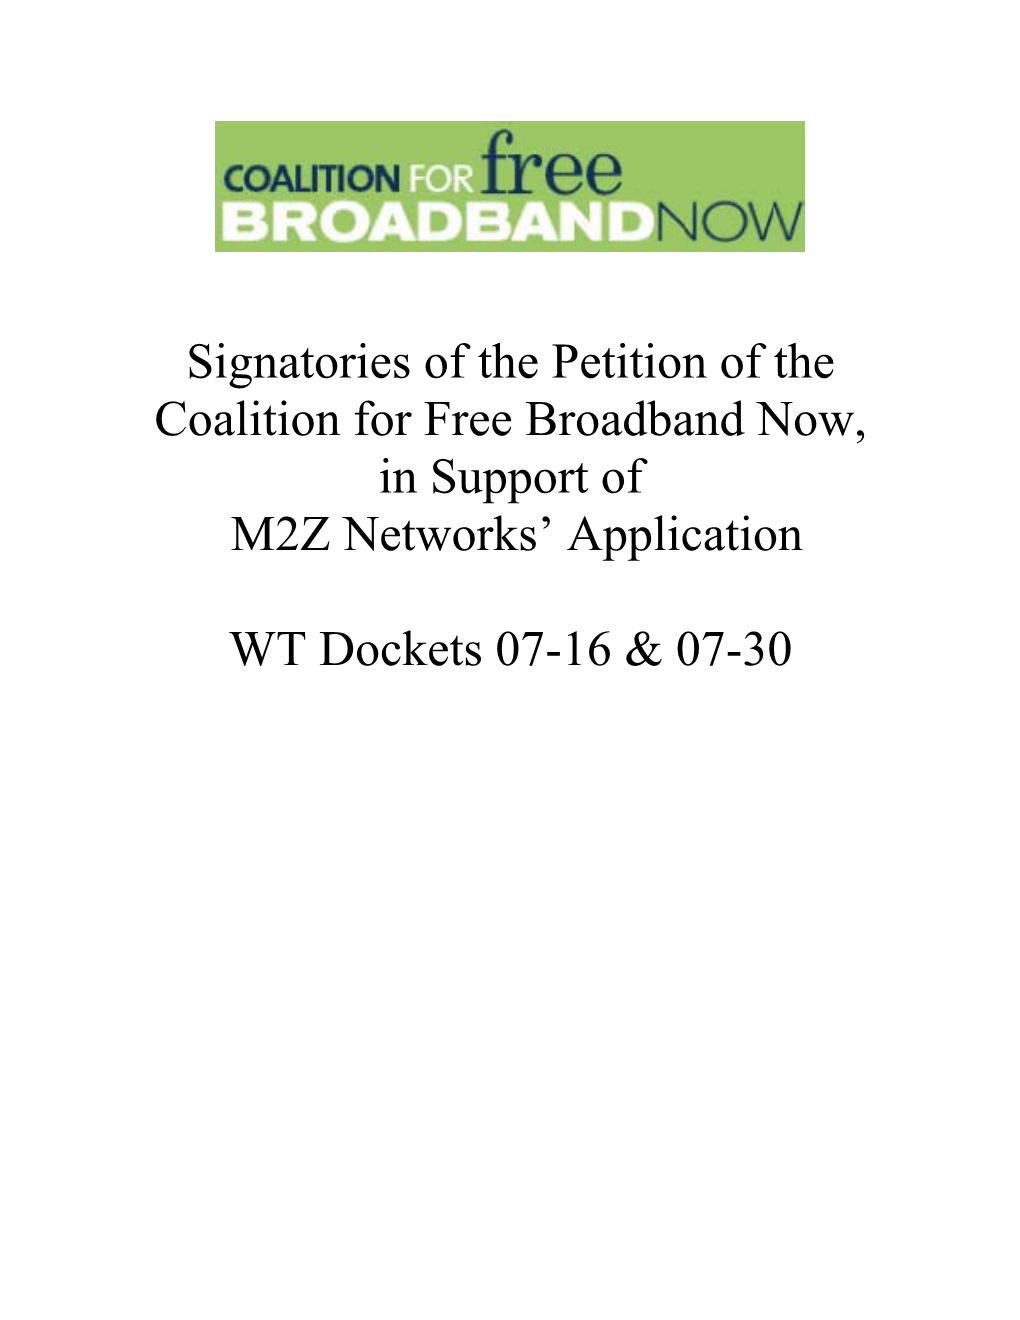 Signatories of the Petition of the Coalition for Free Broadband Now, in Support of M2Z Networks' Application WT Dockets 07-16 & 07-30